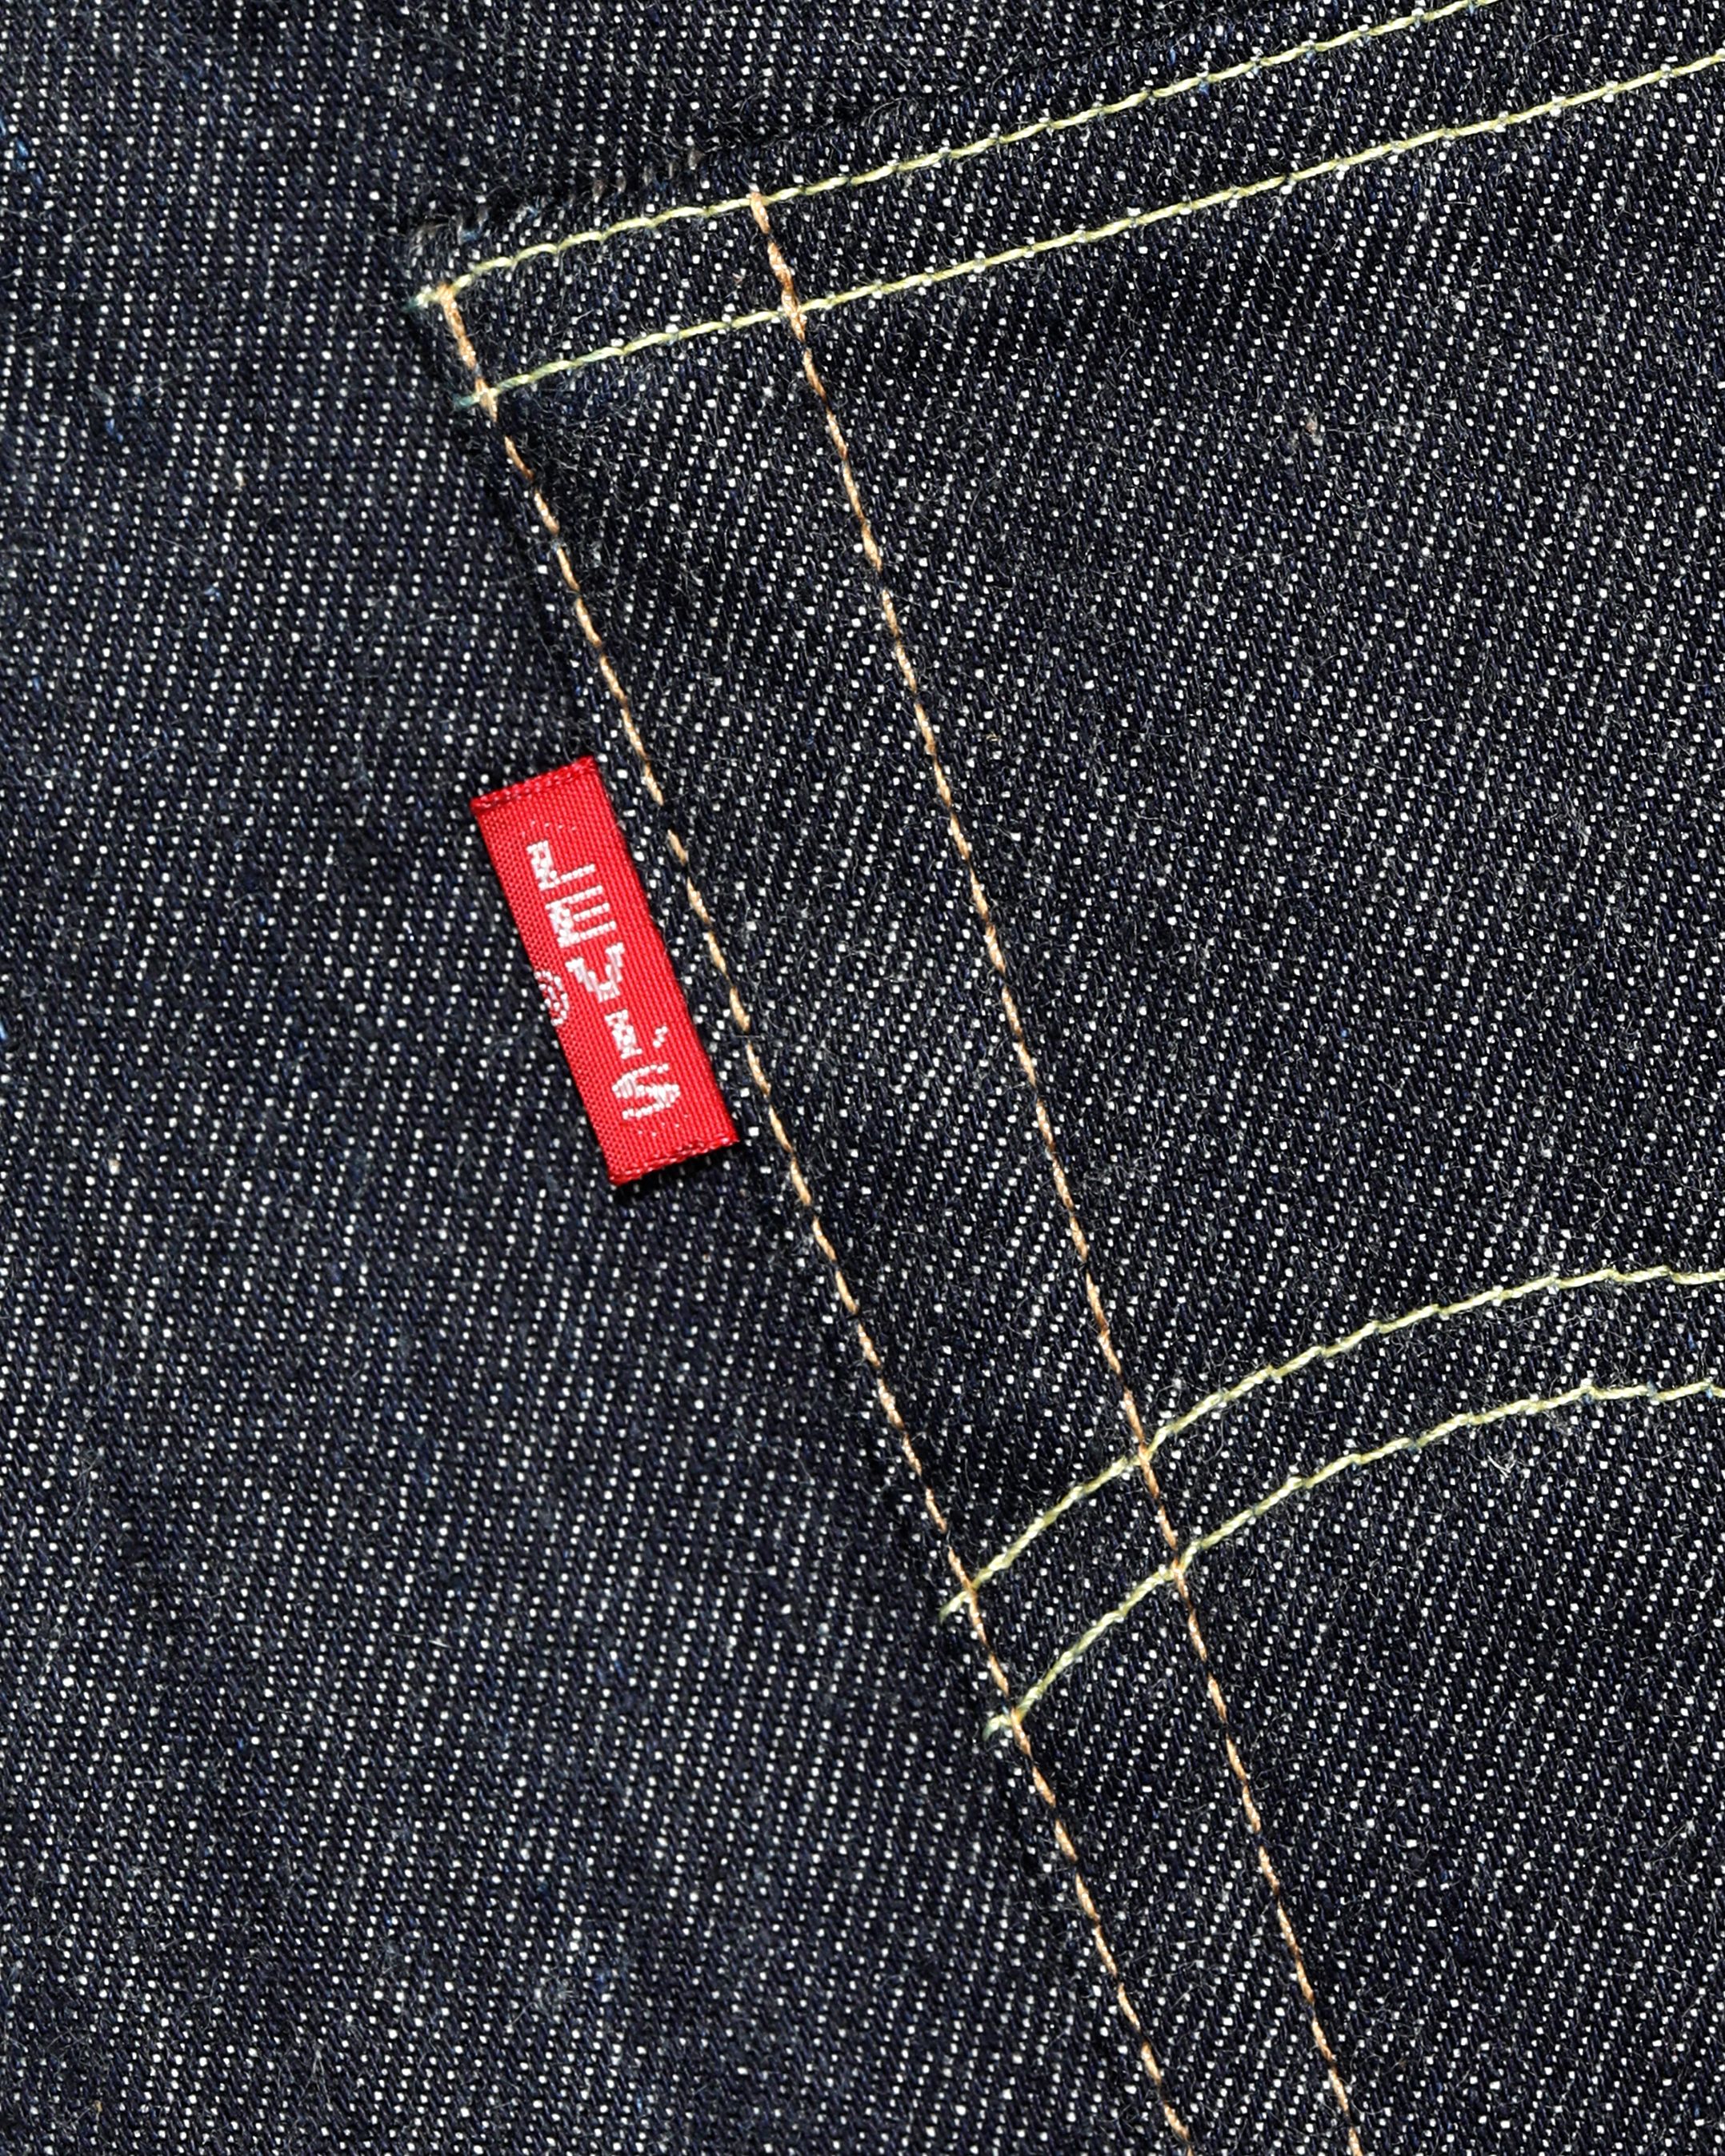 Levi's New 501 Jeans Look Like They Time-Traveled Here from 1963